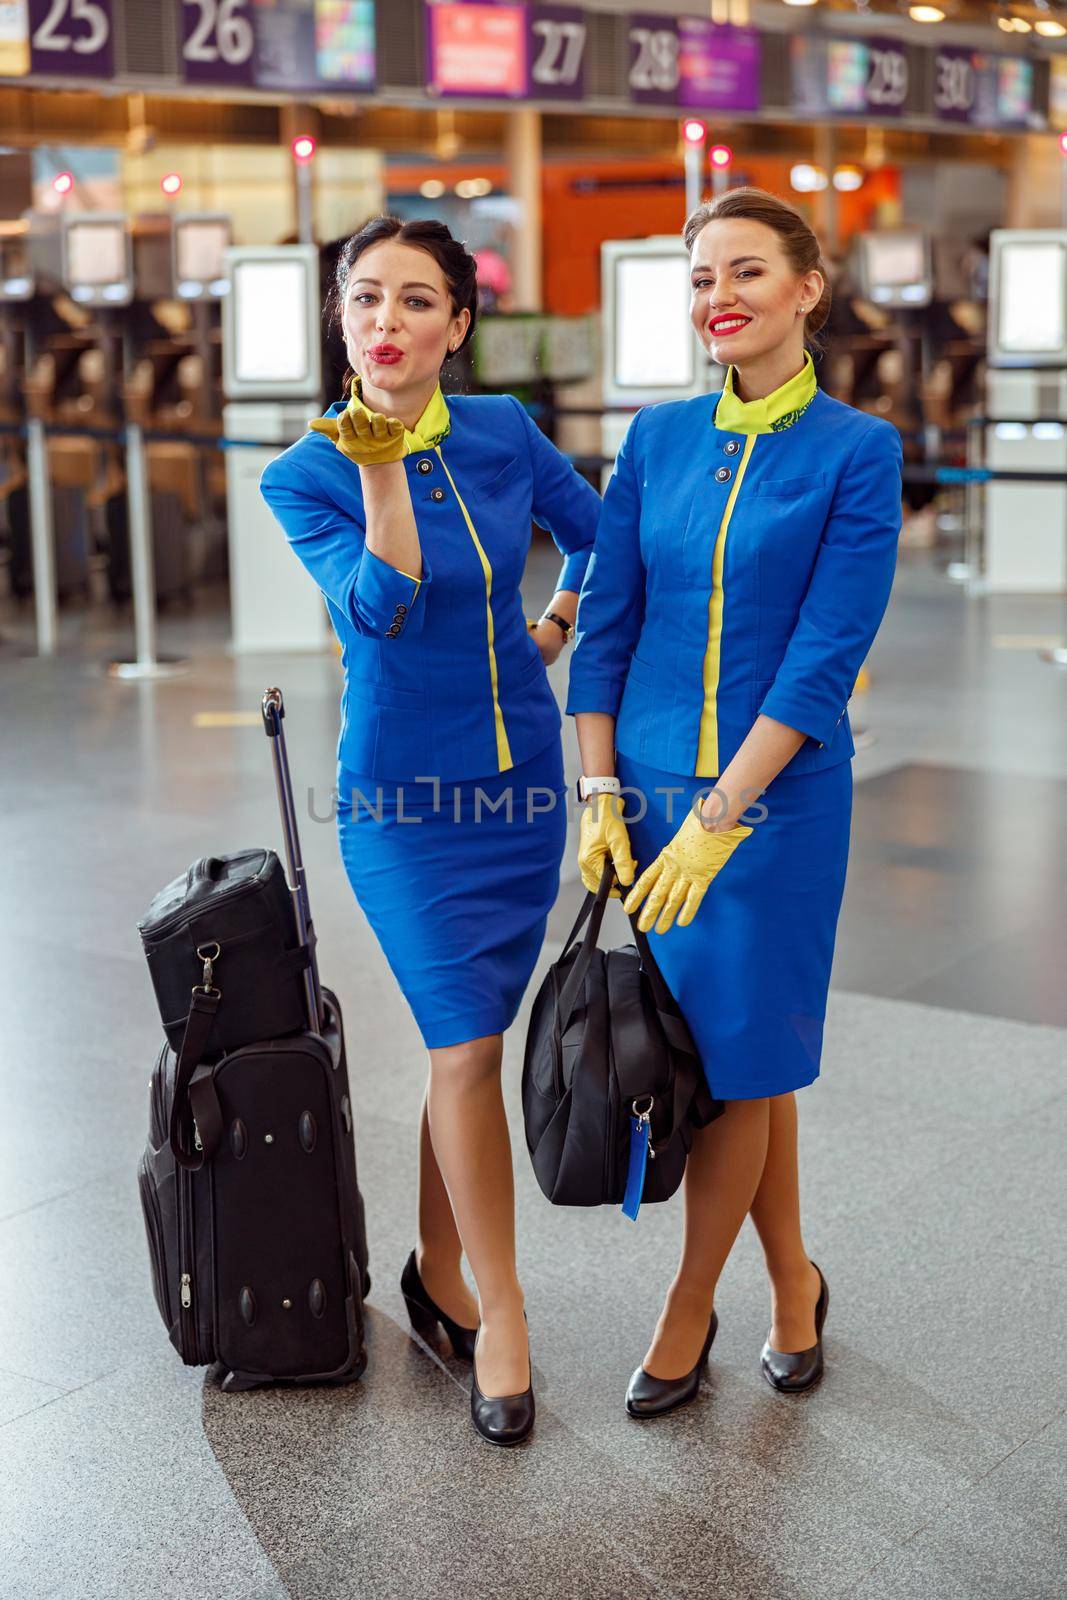 Stewardesses with travel bags standing in airport terminal by Yaroslav_astakhov